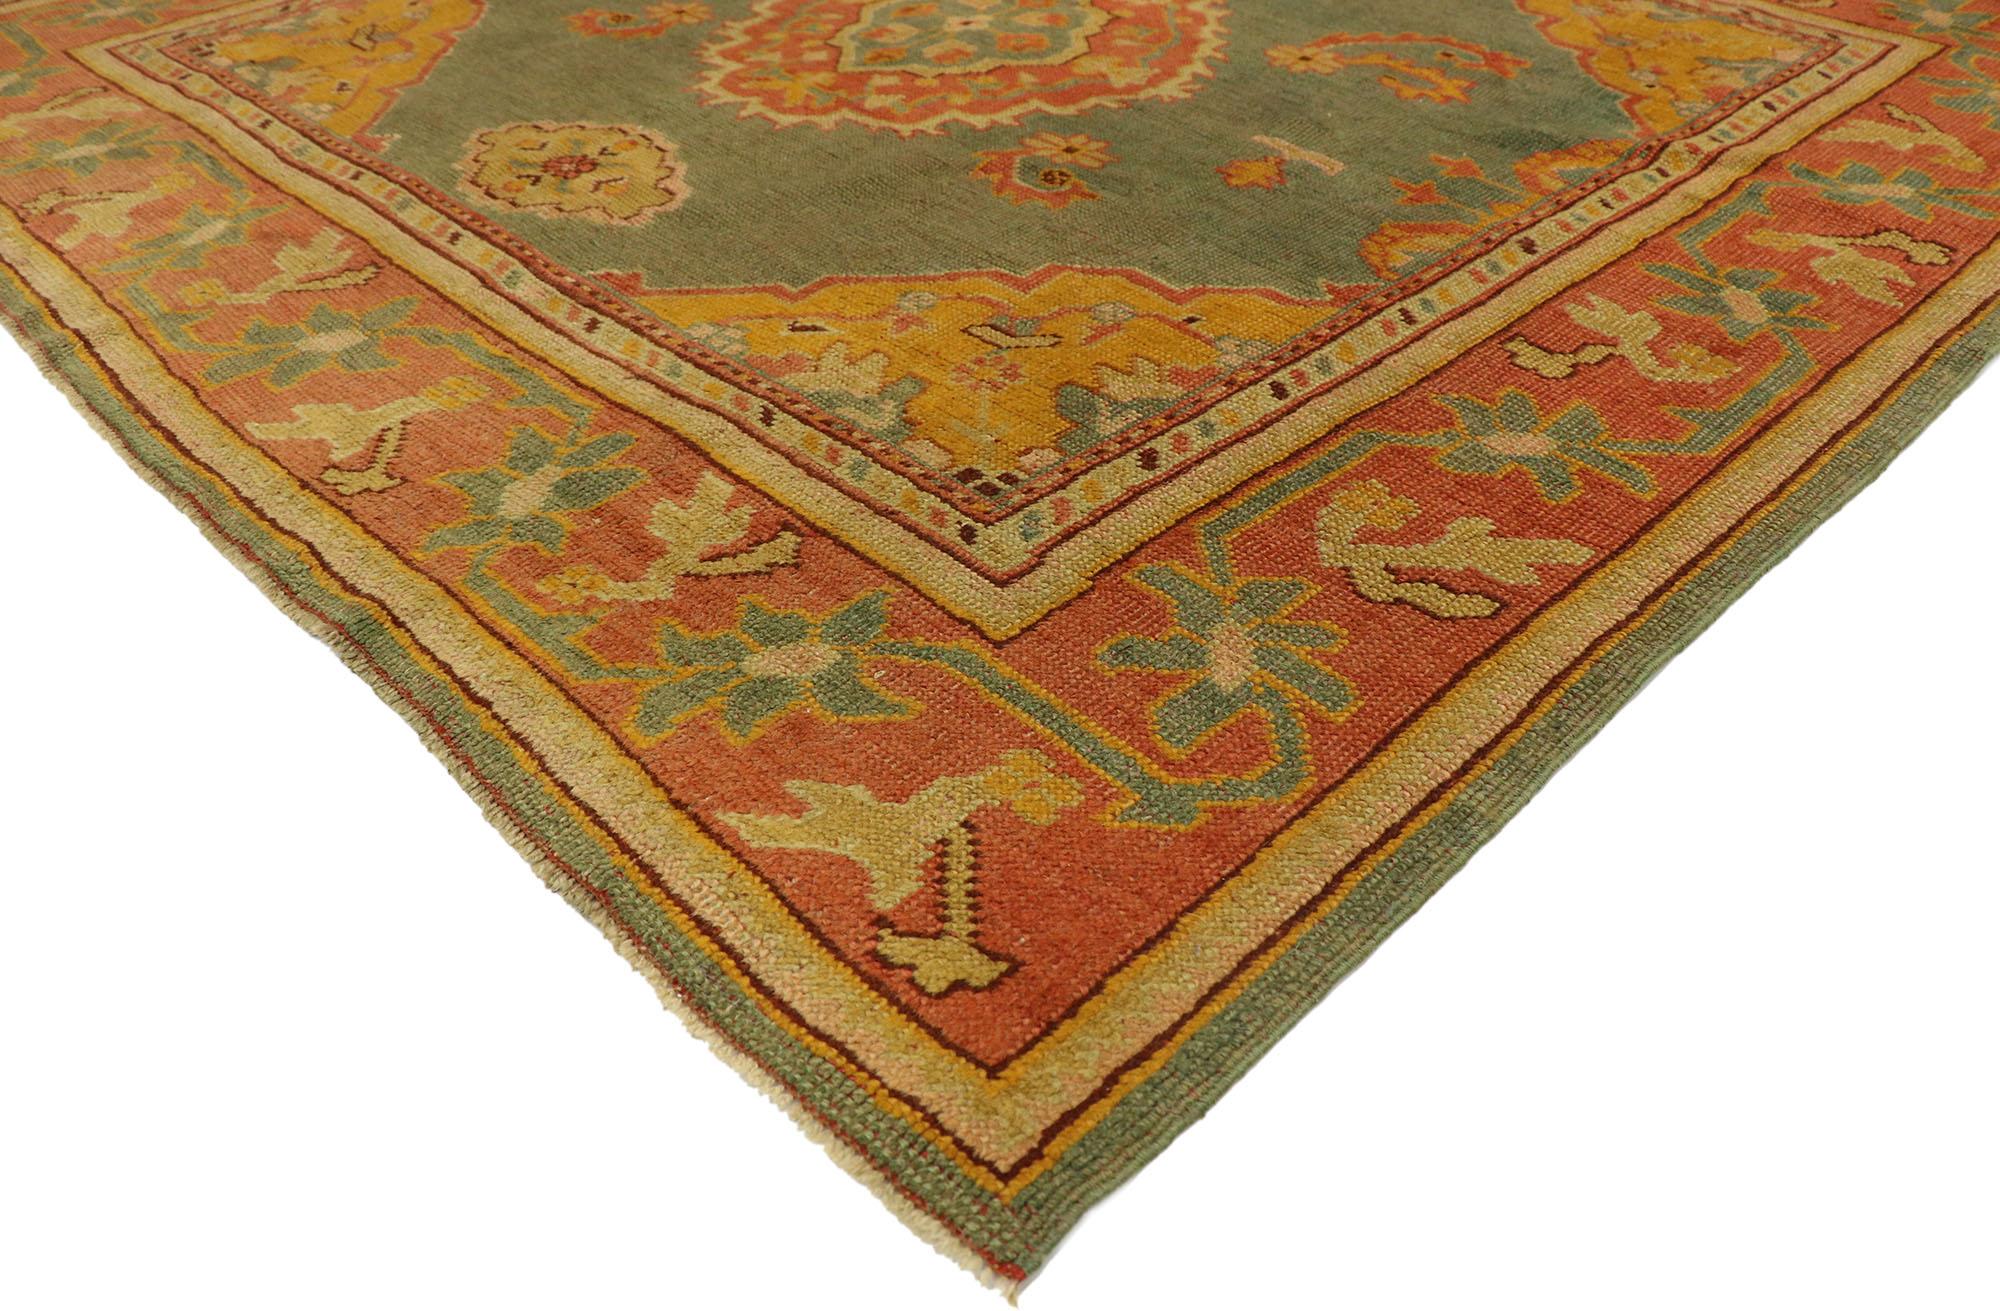 76768, antique Turkish Oushak rug with modern Mediterranean and Italian Tuscan style 05'08 x 06'01. Emanating timeless elegance and warm, earthy colors, this hand knotted wool antique Turkish Oushak rug beautifully embody a modern Mediterranean